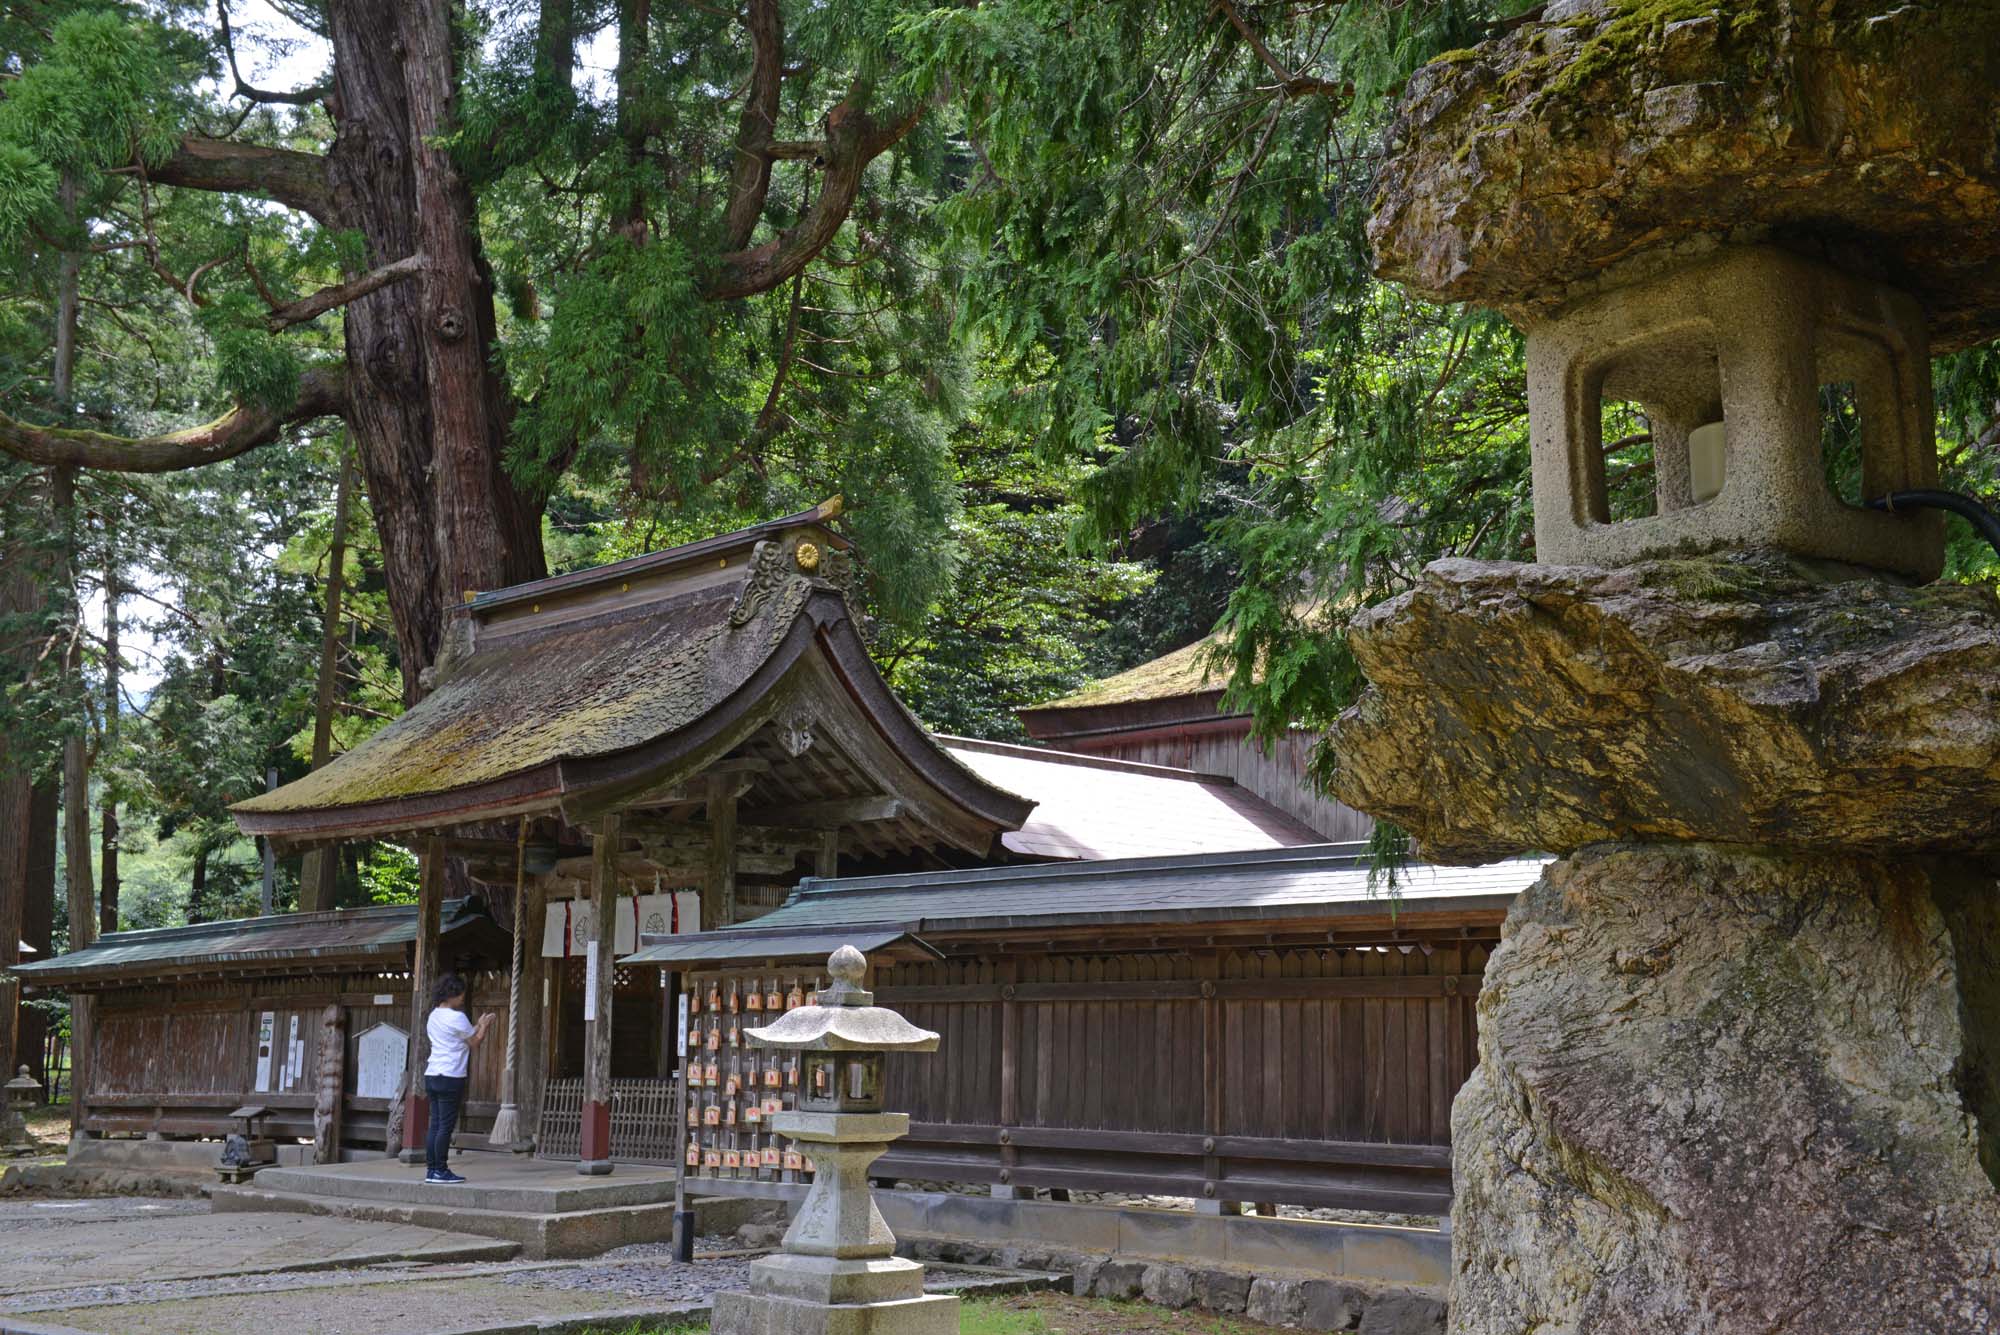 All natural materials: Wakasahime Shrine, which dates from 714, is made of wood, thatch and stone. | STEPHEN MANSFIELD